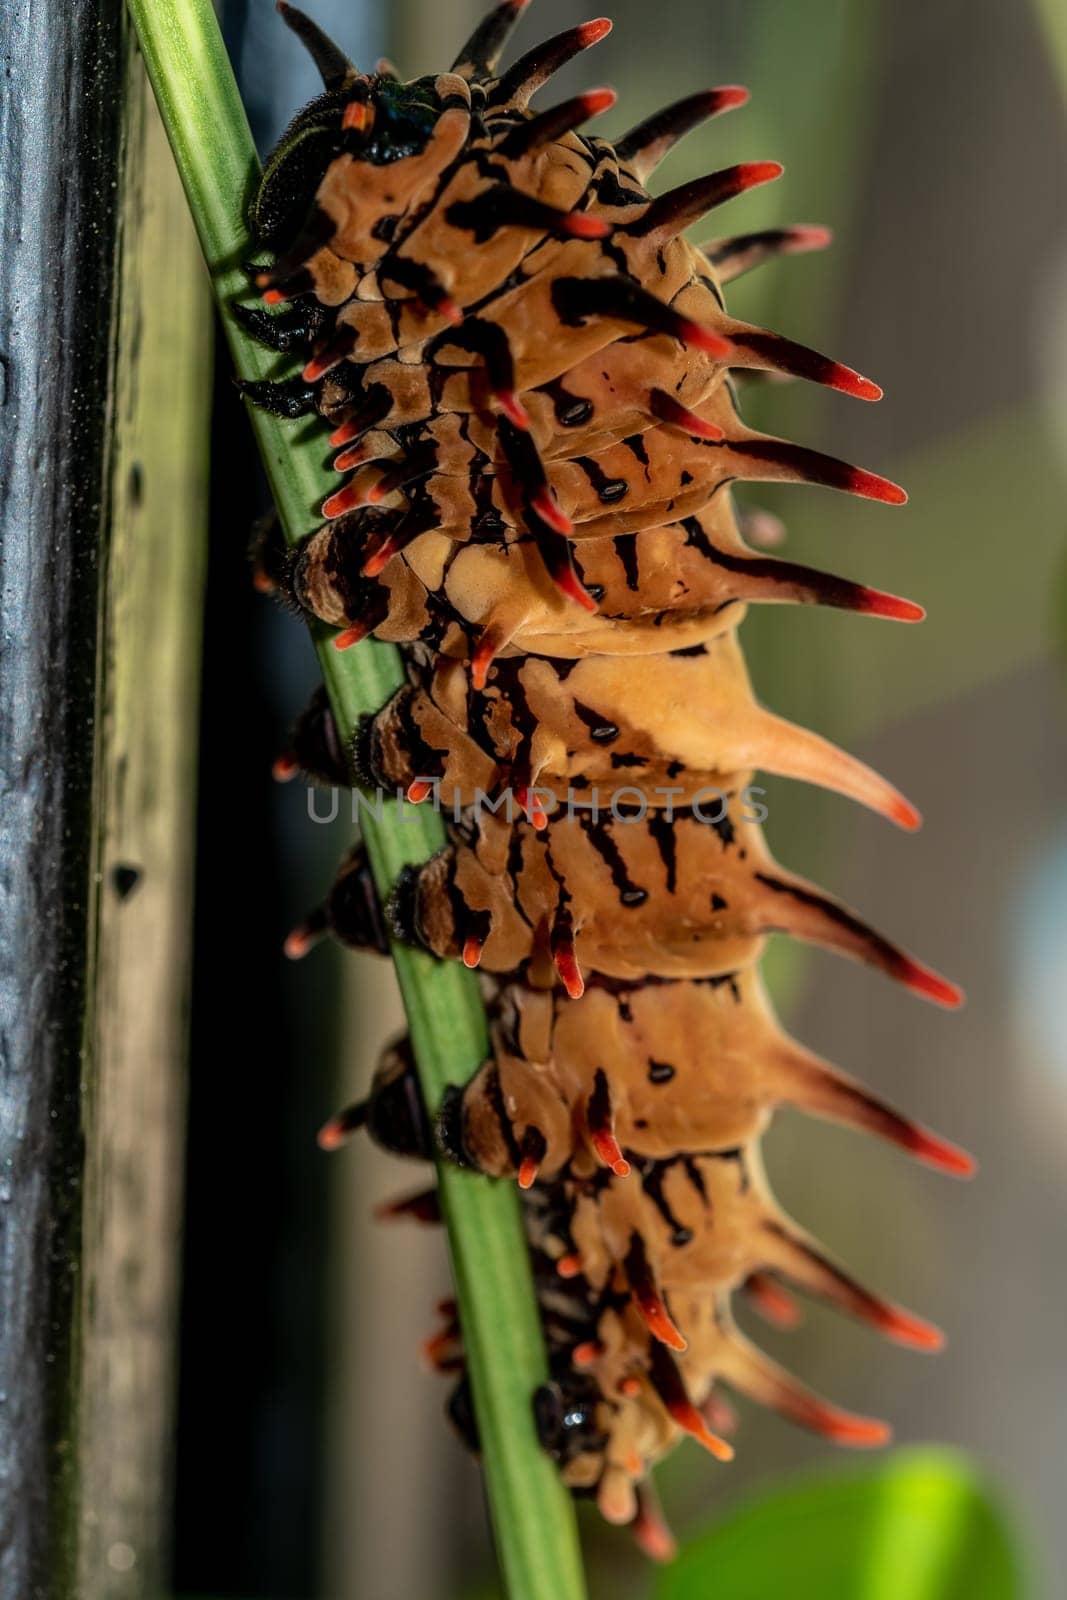 The brown color with long protrusions resembling thorns of the Golden Birdwing caterpillar by Satakorn